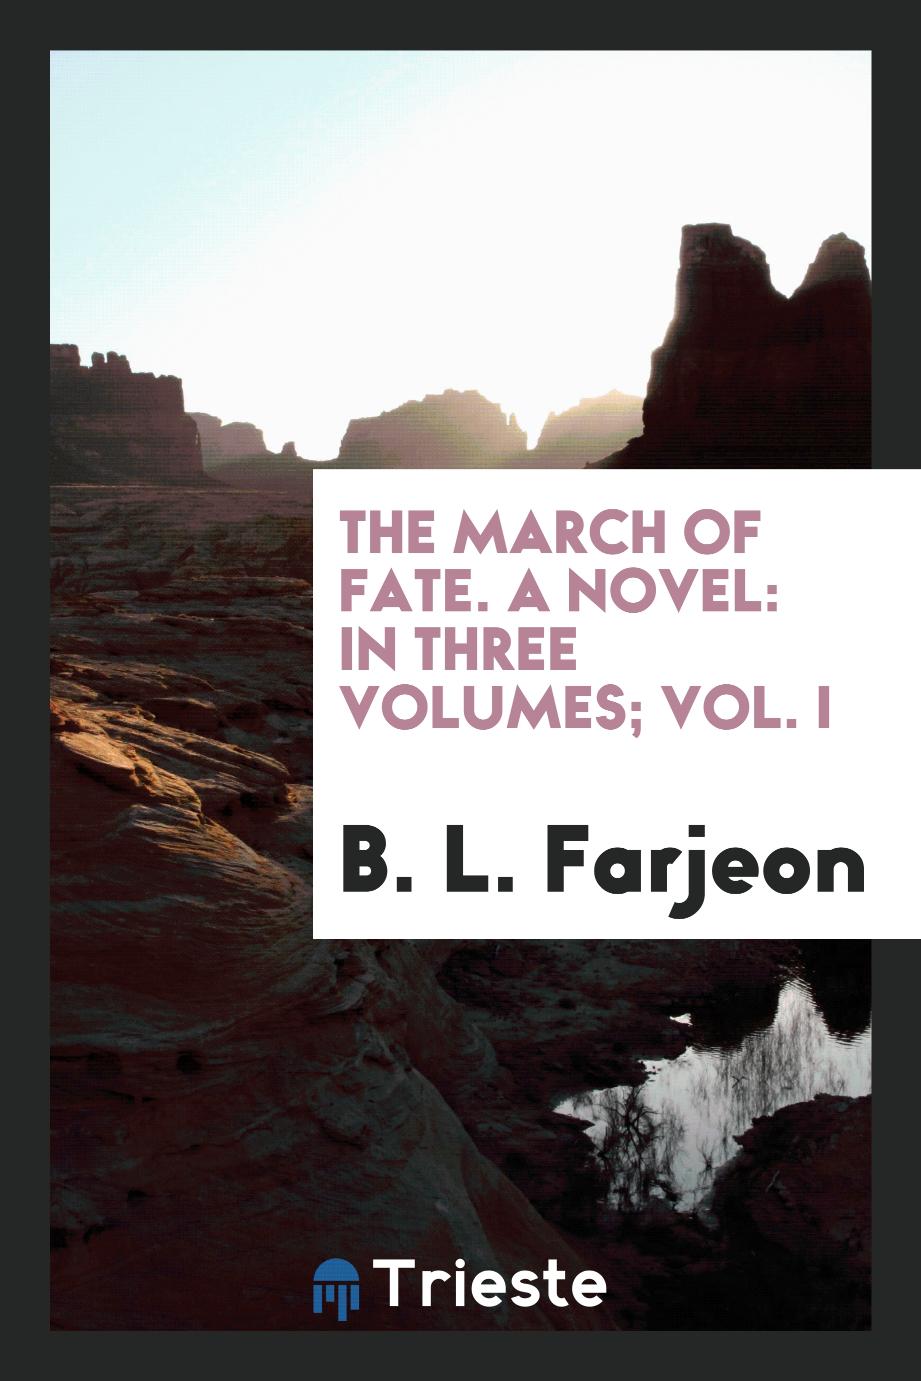 The march of fate. A novel: in three volumes; Vol. I